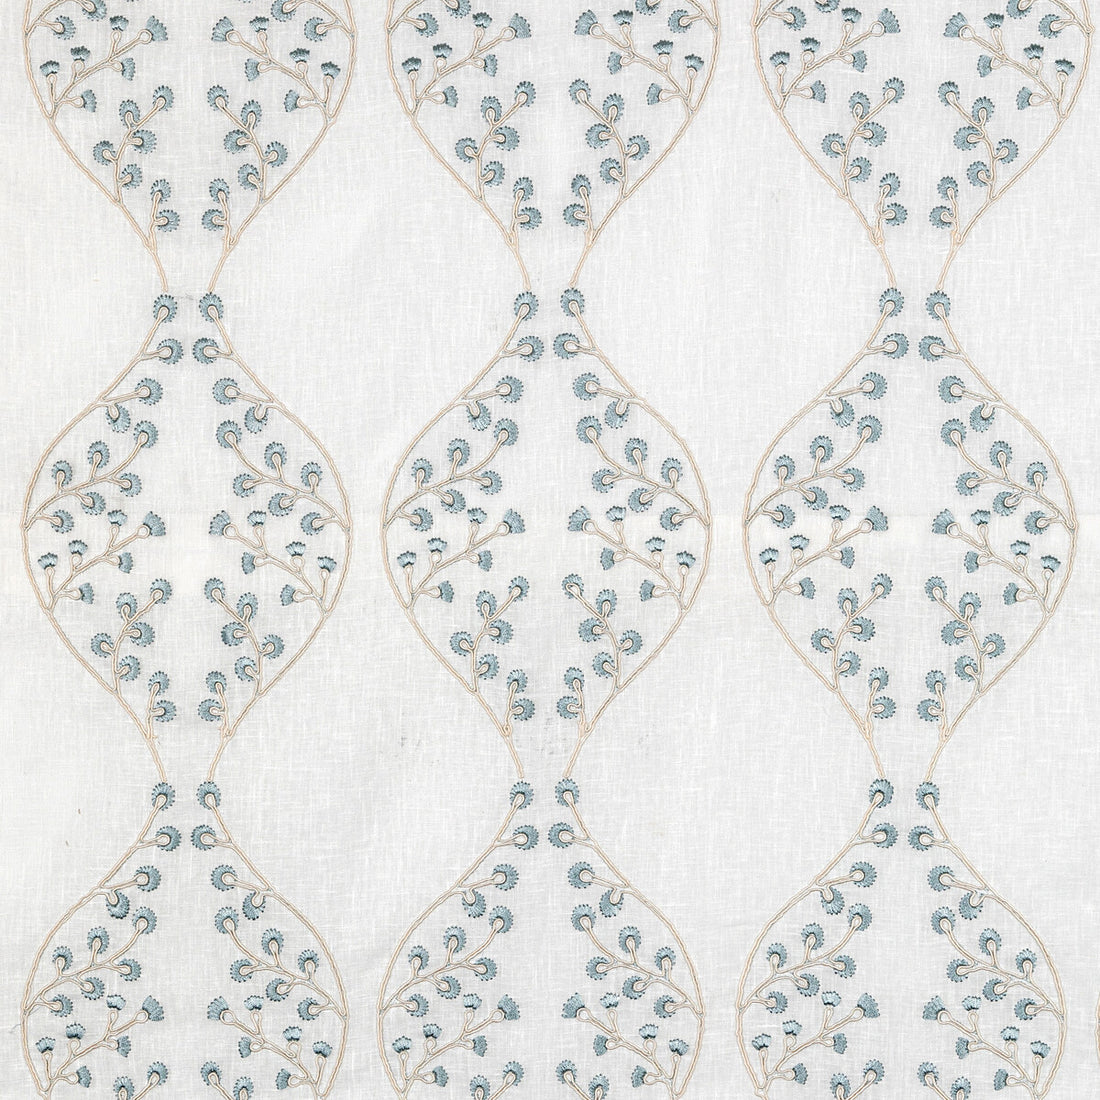 Lillie Sheer fabric in ivory/blue color - pattern 2021130.516.0 - by Lee Jofa in the Summerland collection